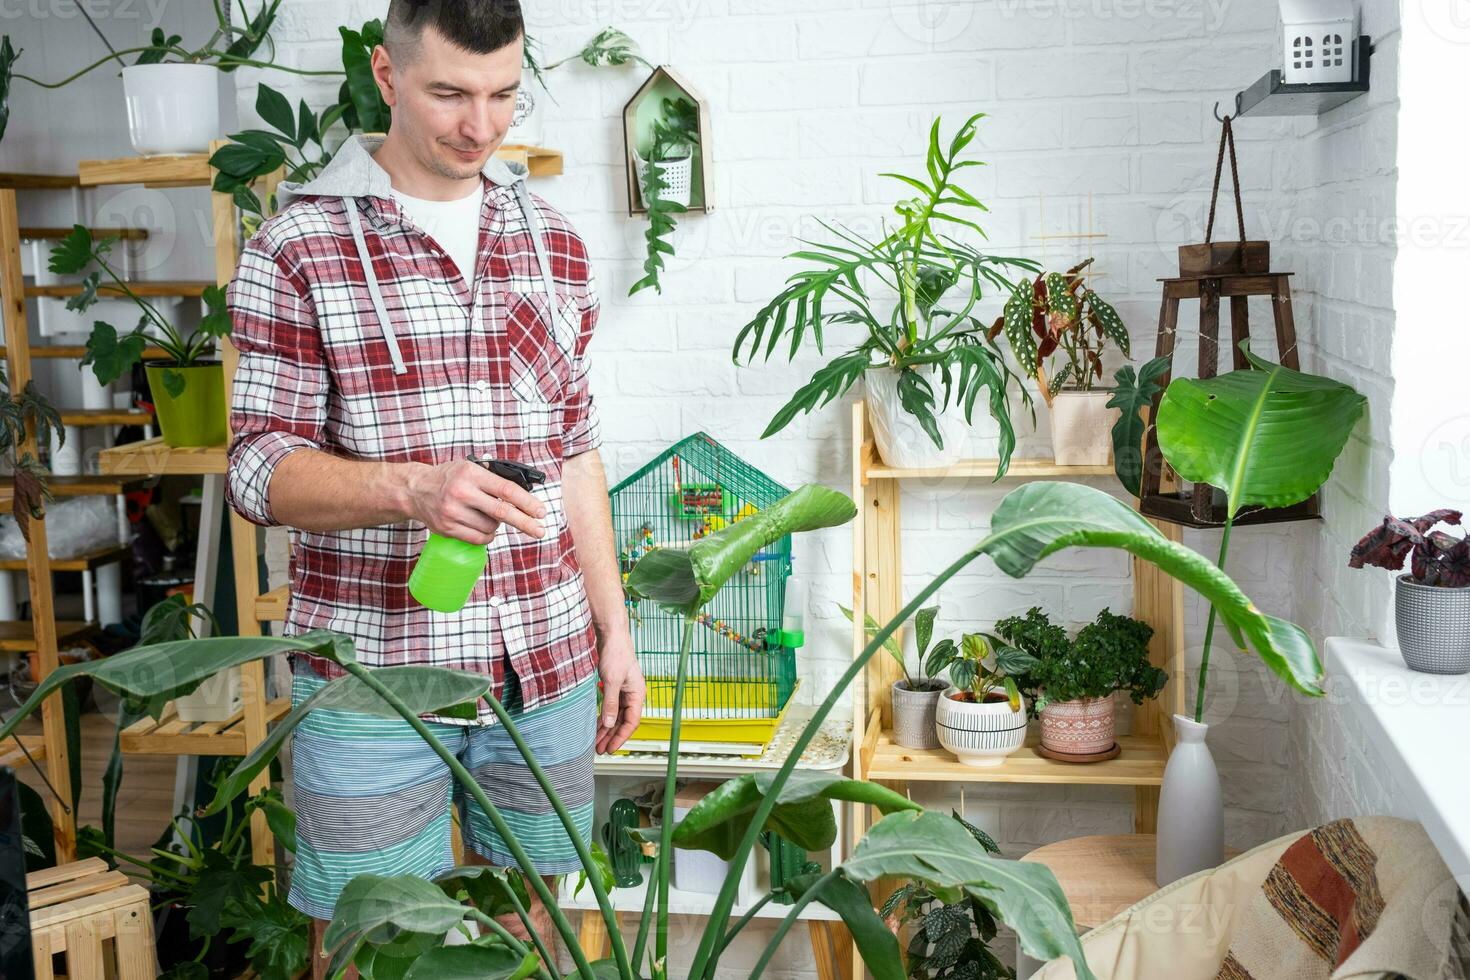 Man sprays from a spray gun home plants from her collection, grown with love on shelves in the interior of the house. Home plant growing, green house, water balance, humidification photo